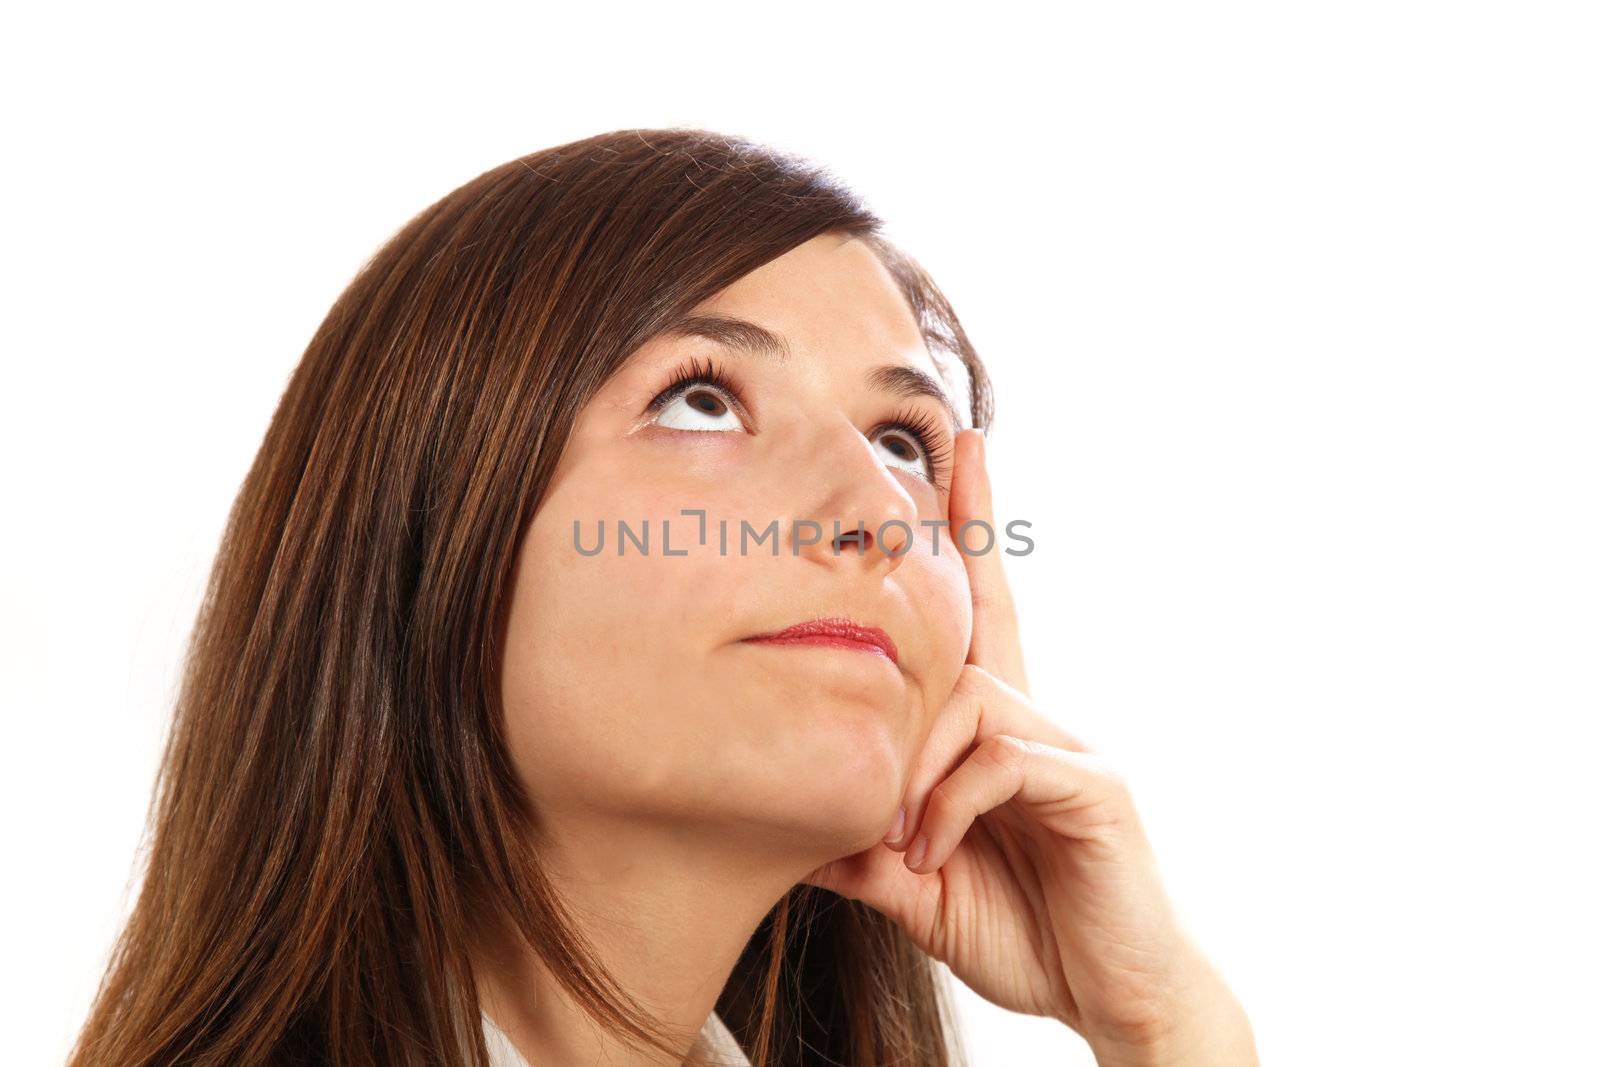 A young woman looking upwards reflectively and deliberately - with space for text